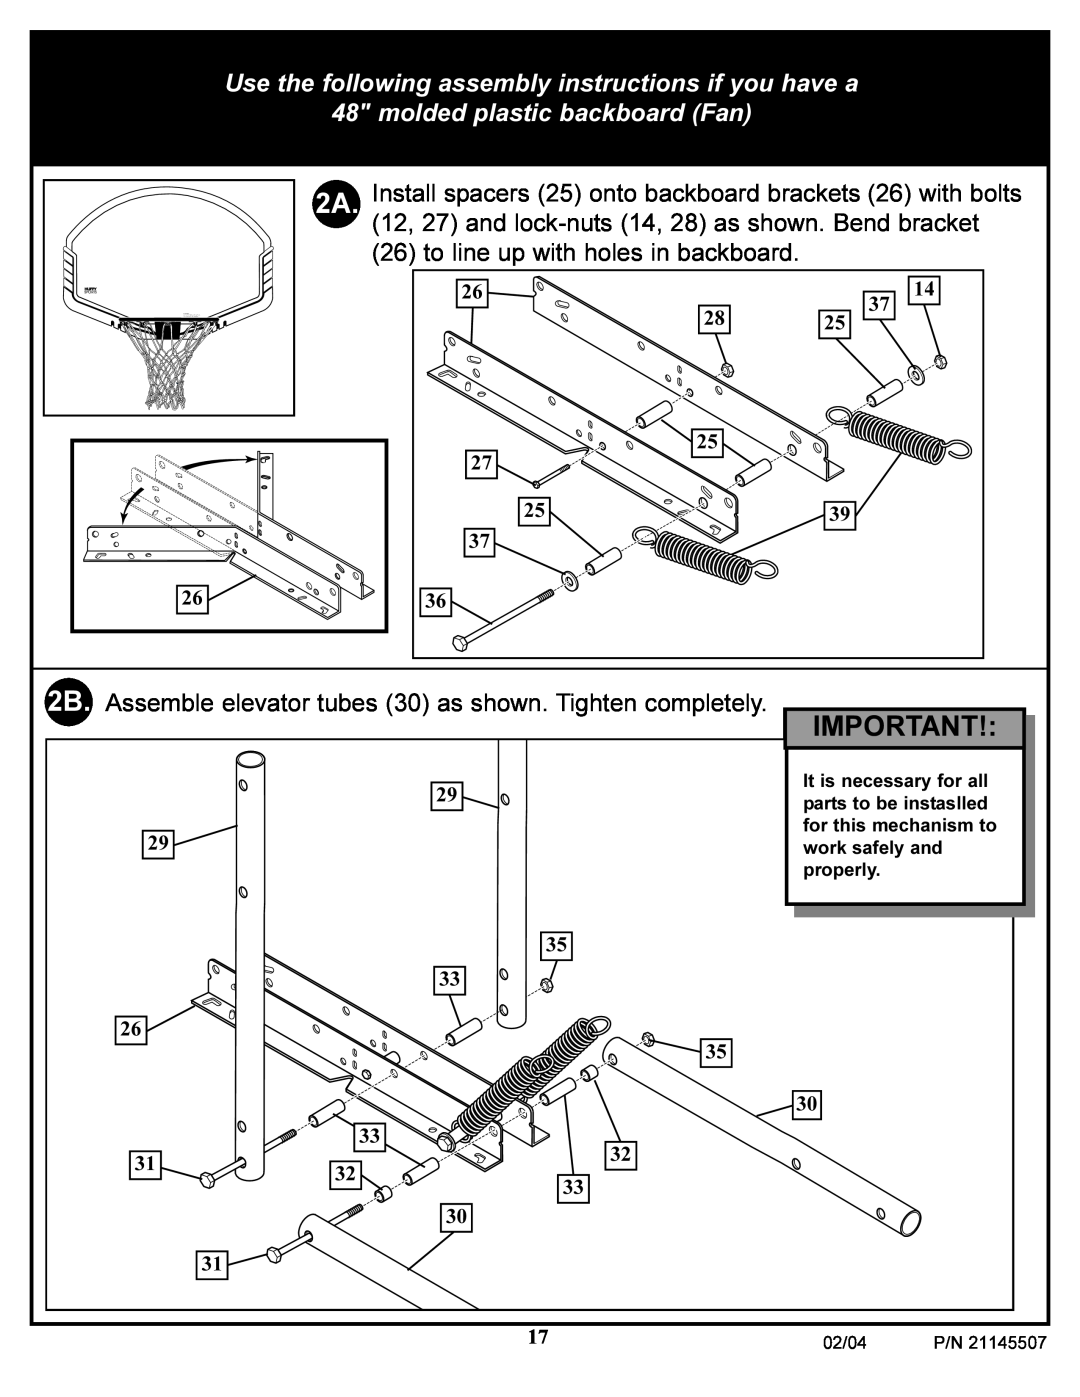 Huffy Sports Basketball Systems Use the following assembly instructions if you have a, molded plastic backboard Fan, 02/04 